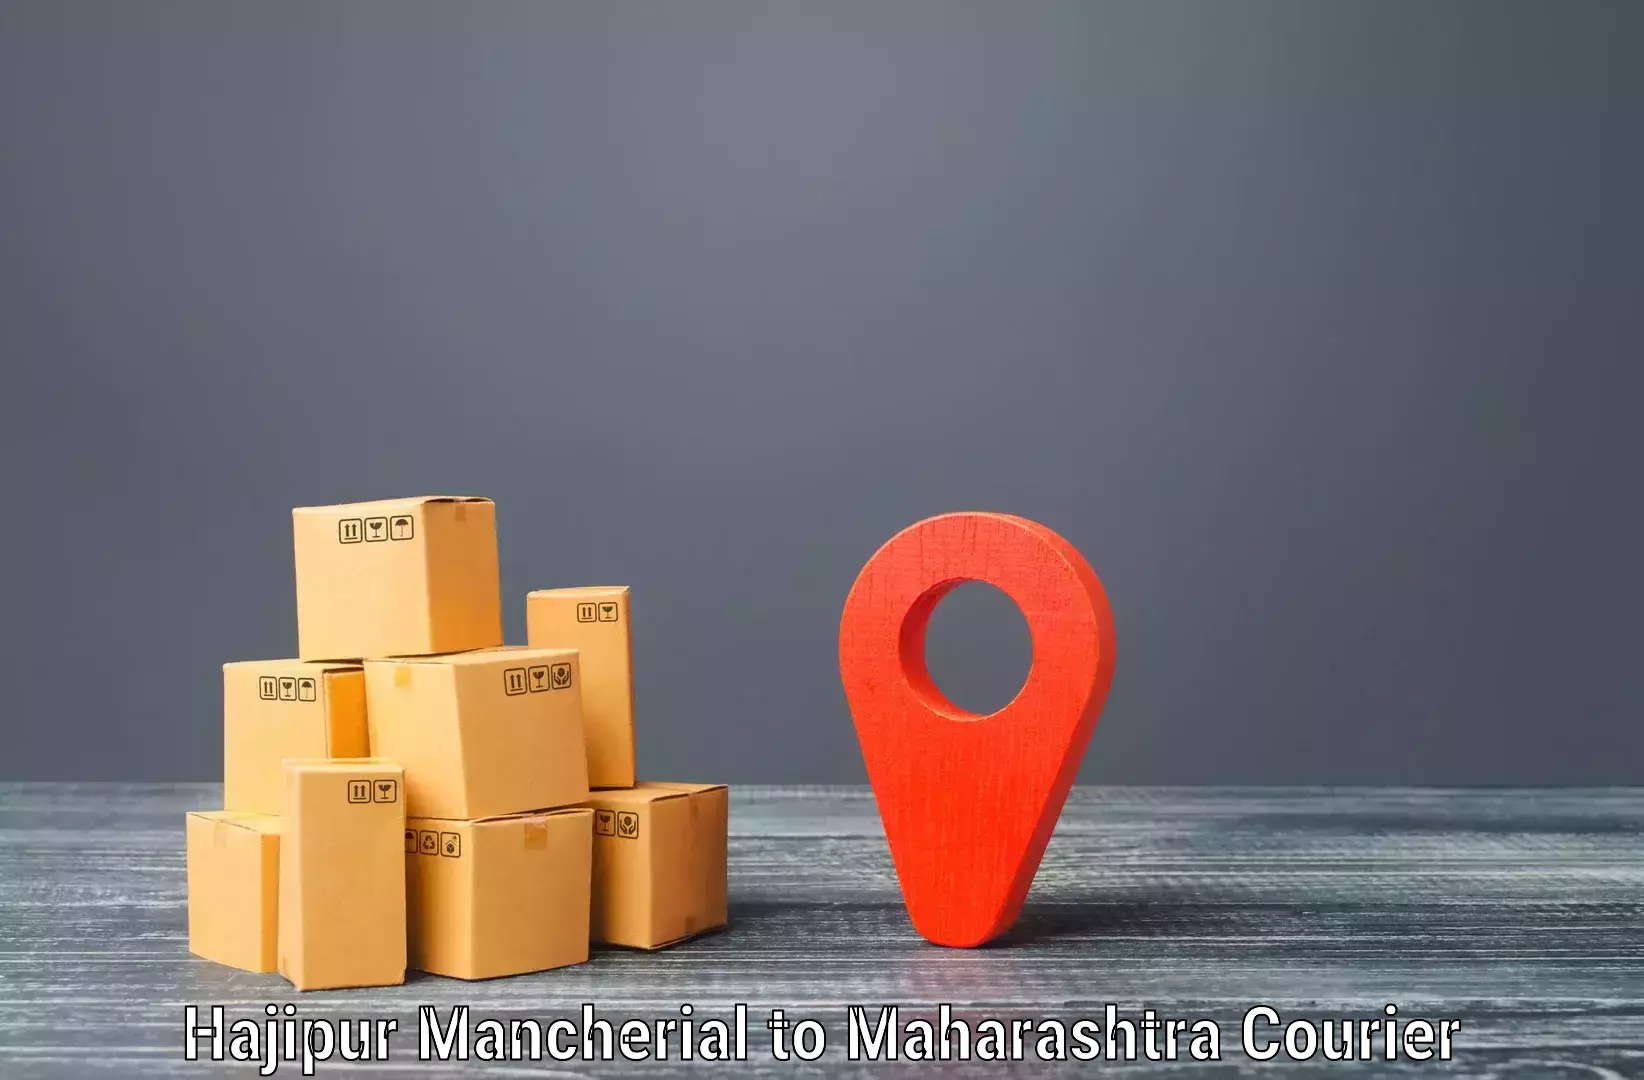 Emergency parcel delivery in Hajipur Mancherial to Chandwad